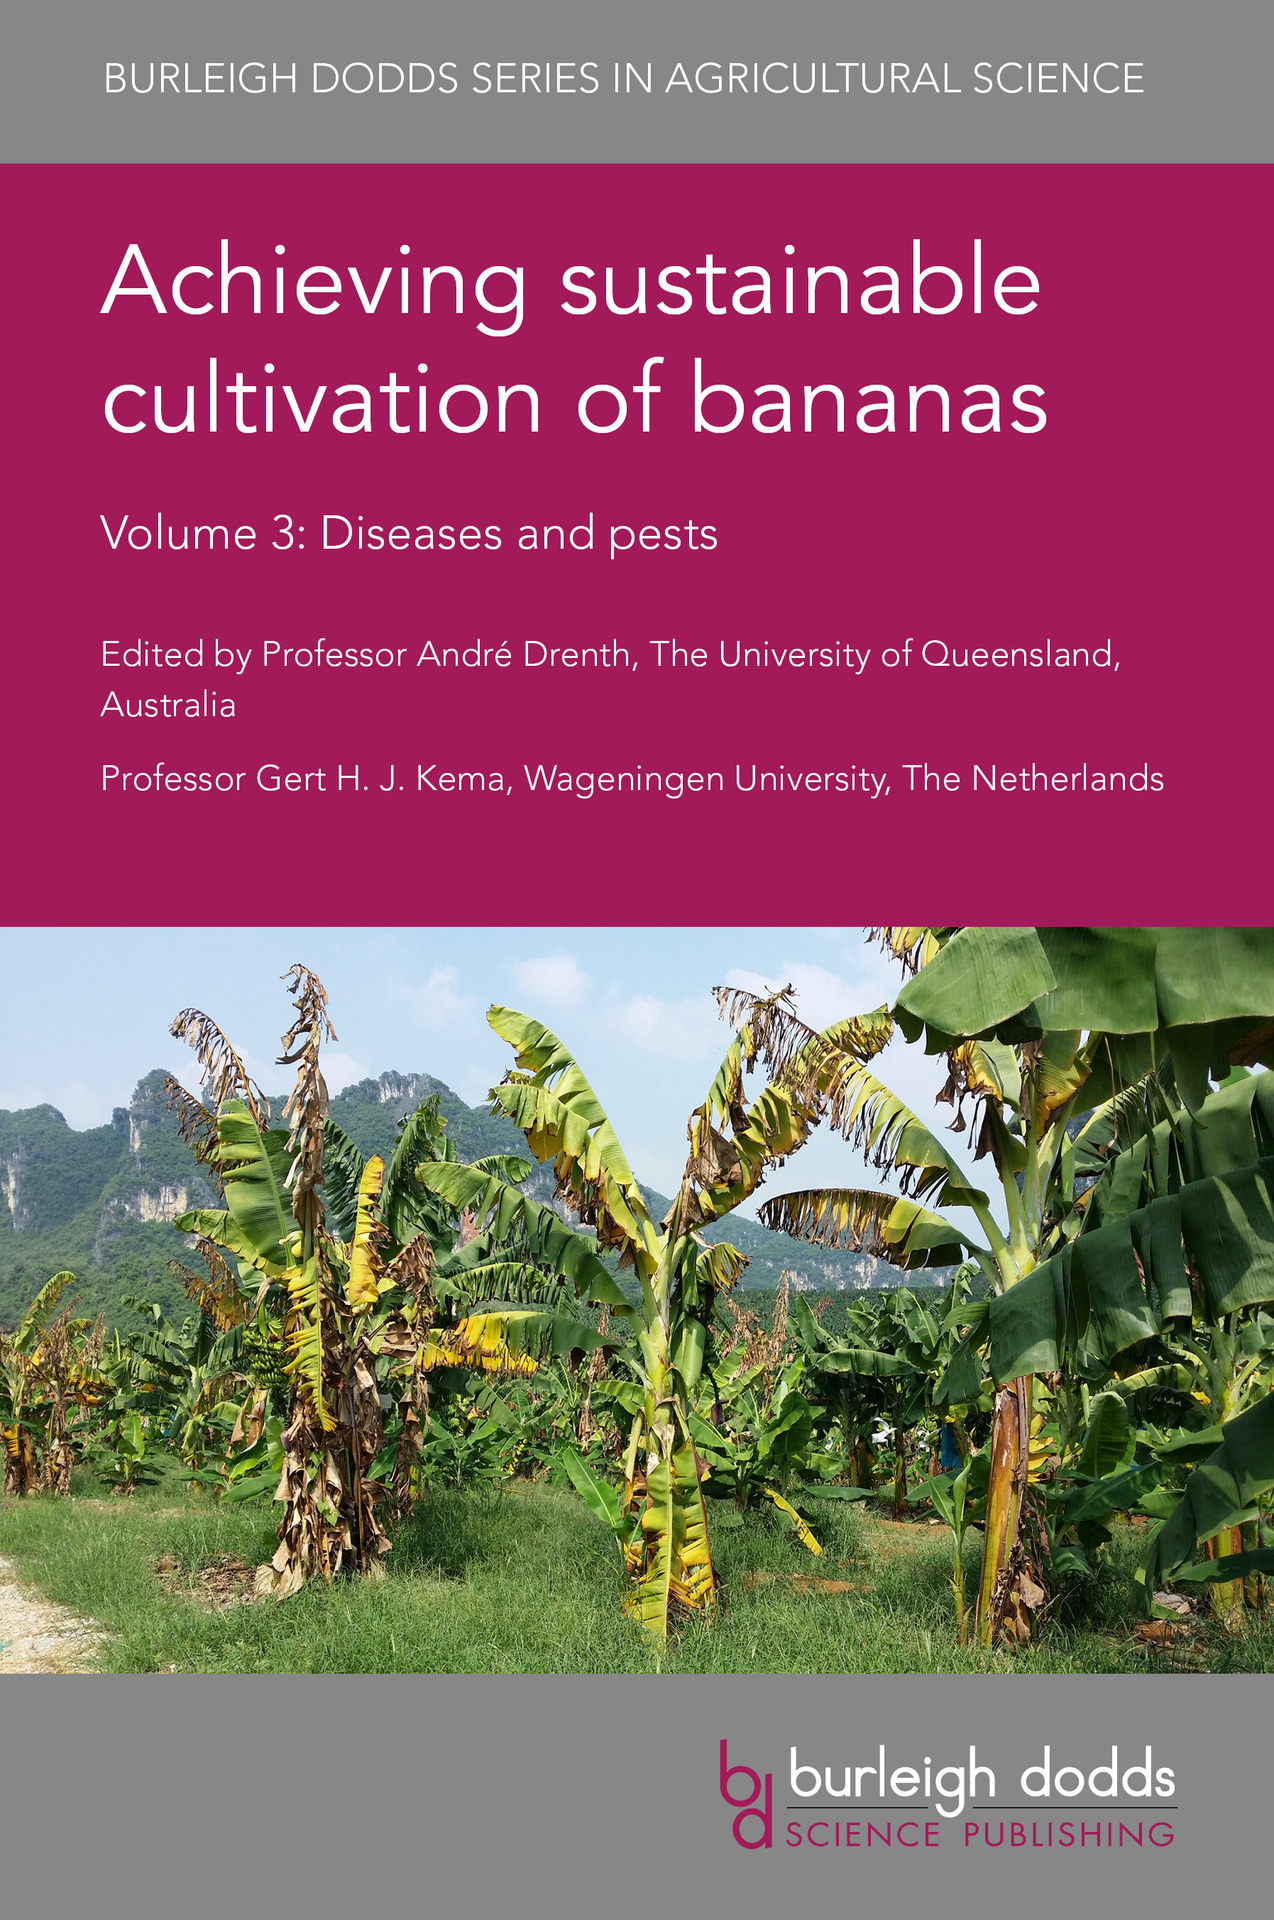 Achieving sustainable cultivation of bananas - Volume 3